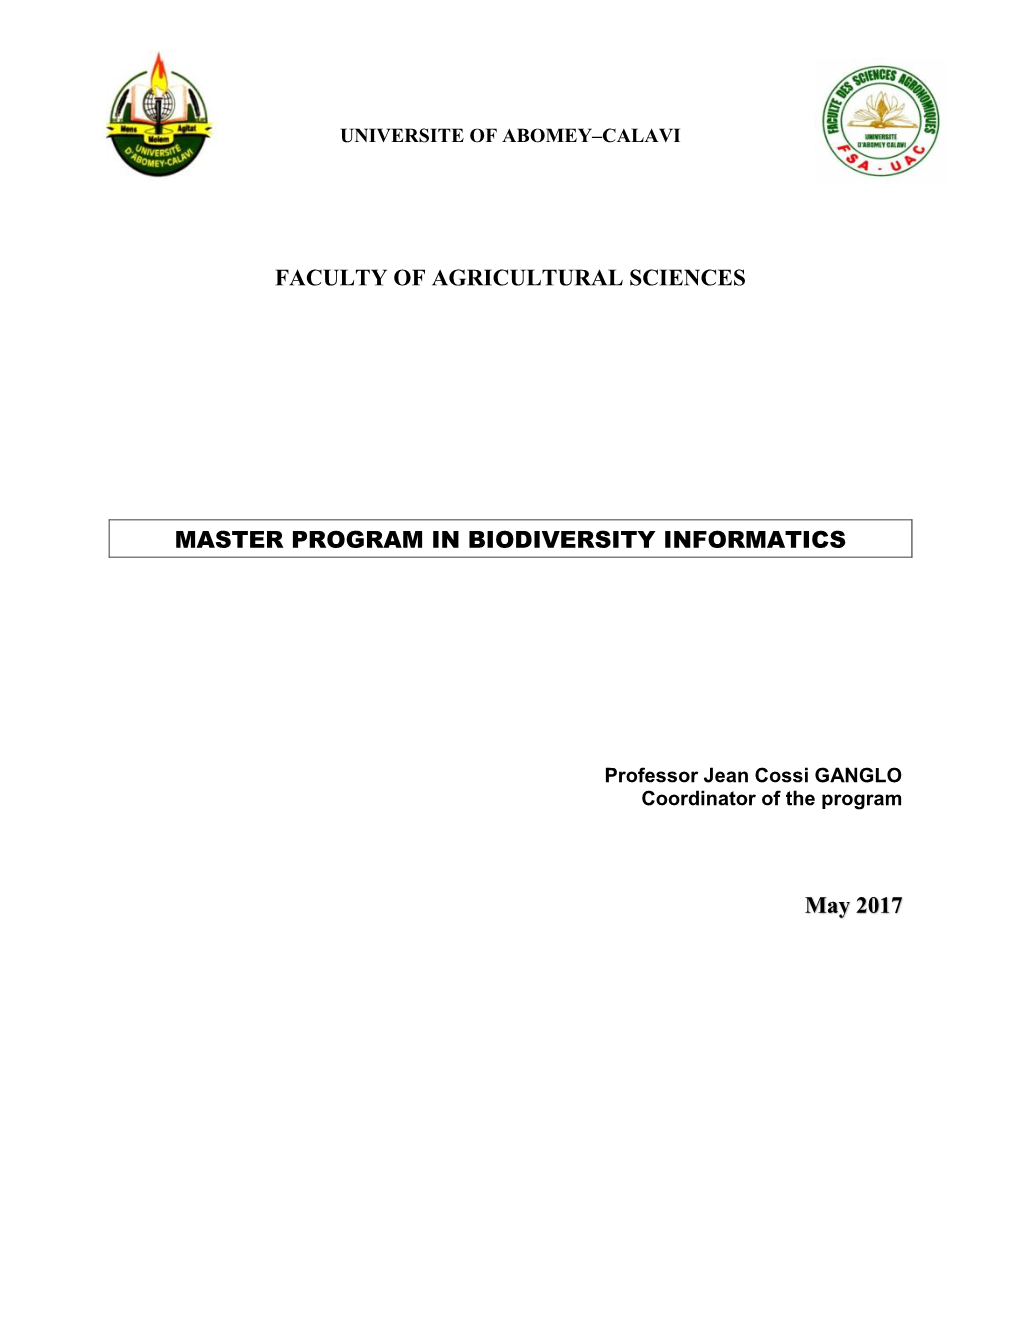 Faculty of Agricultural Sciences Master Program in Biodiversity Informatics